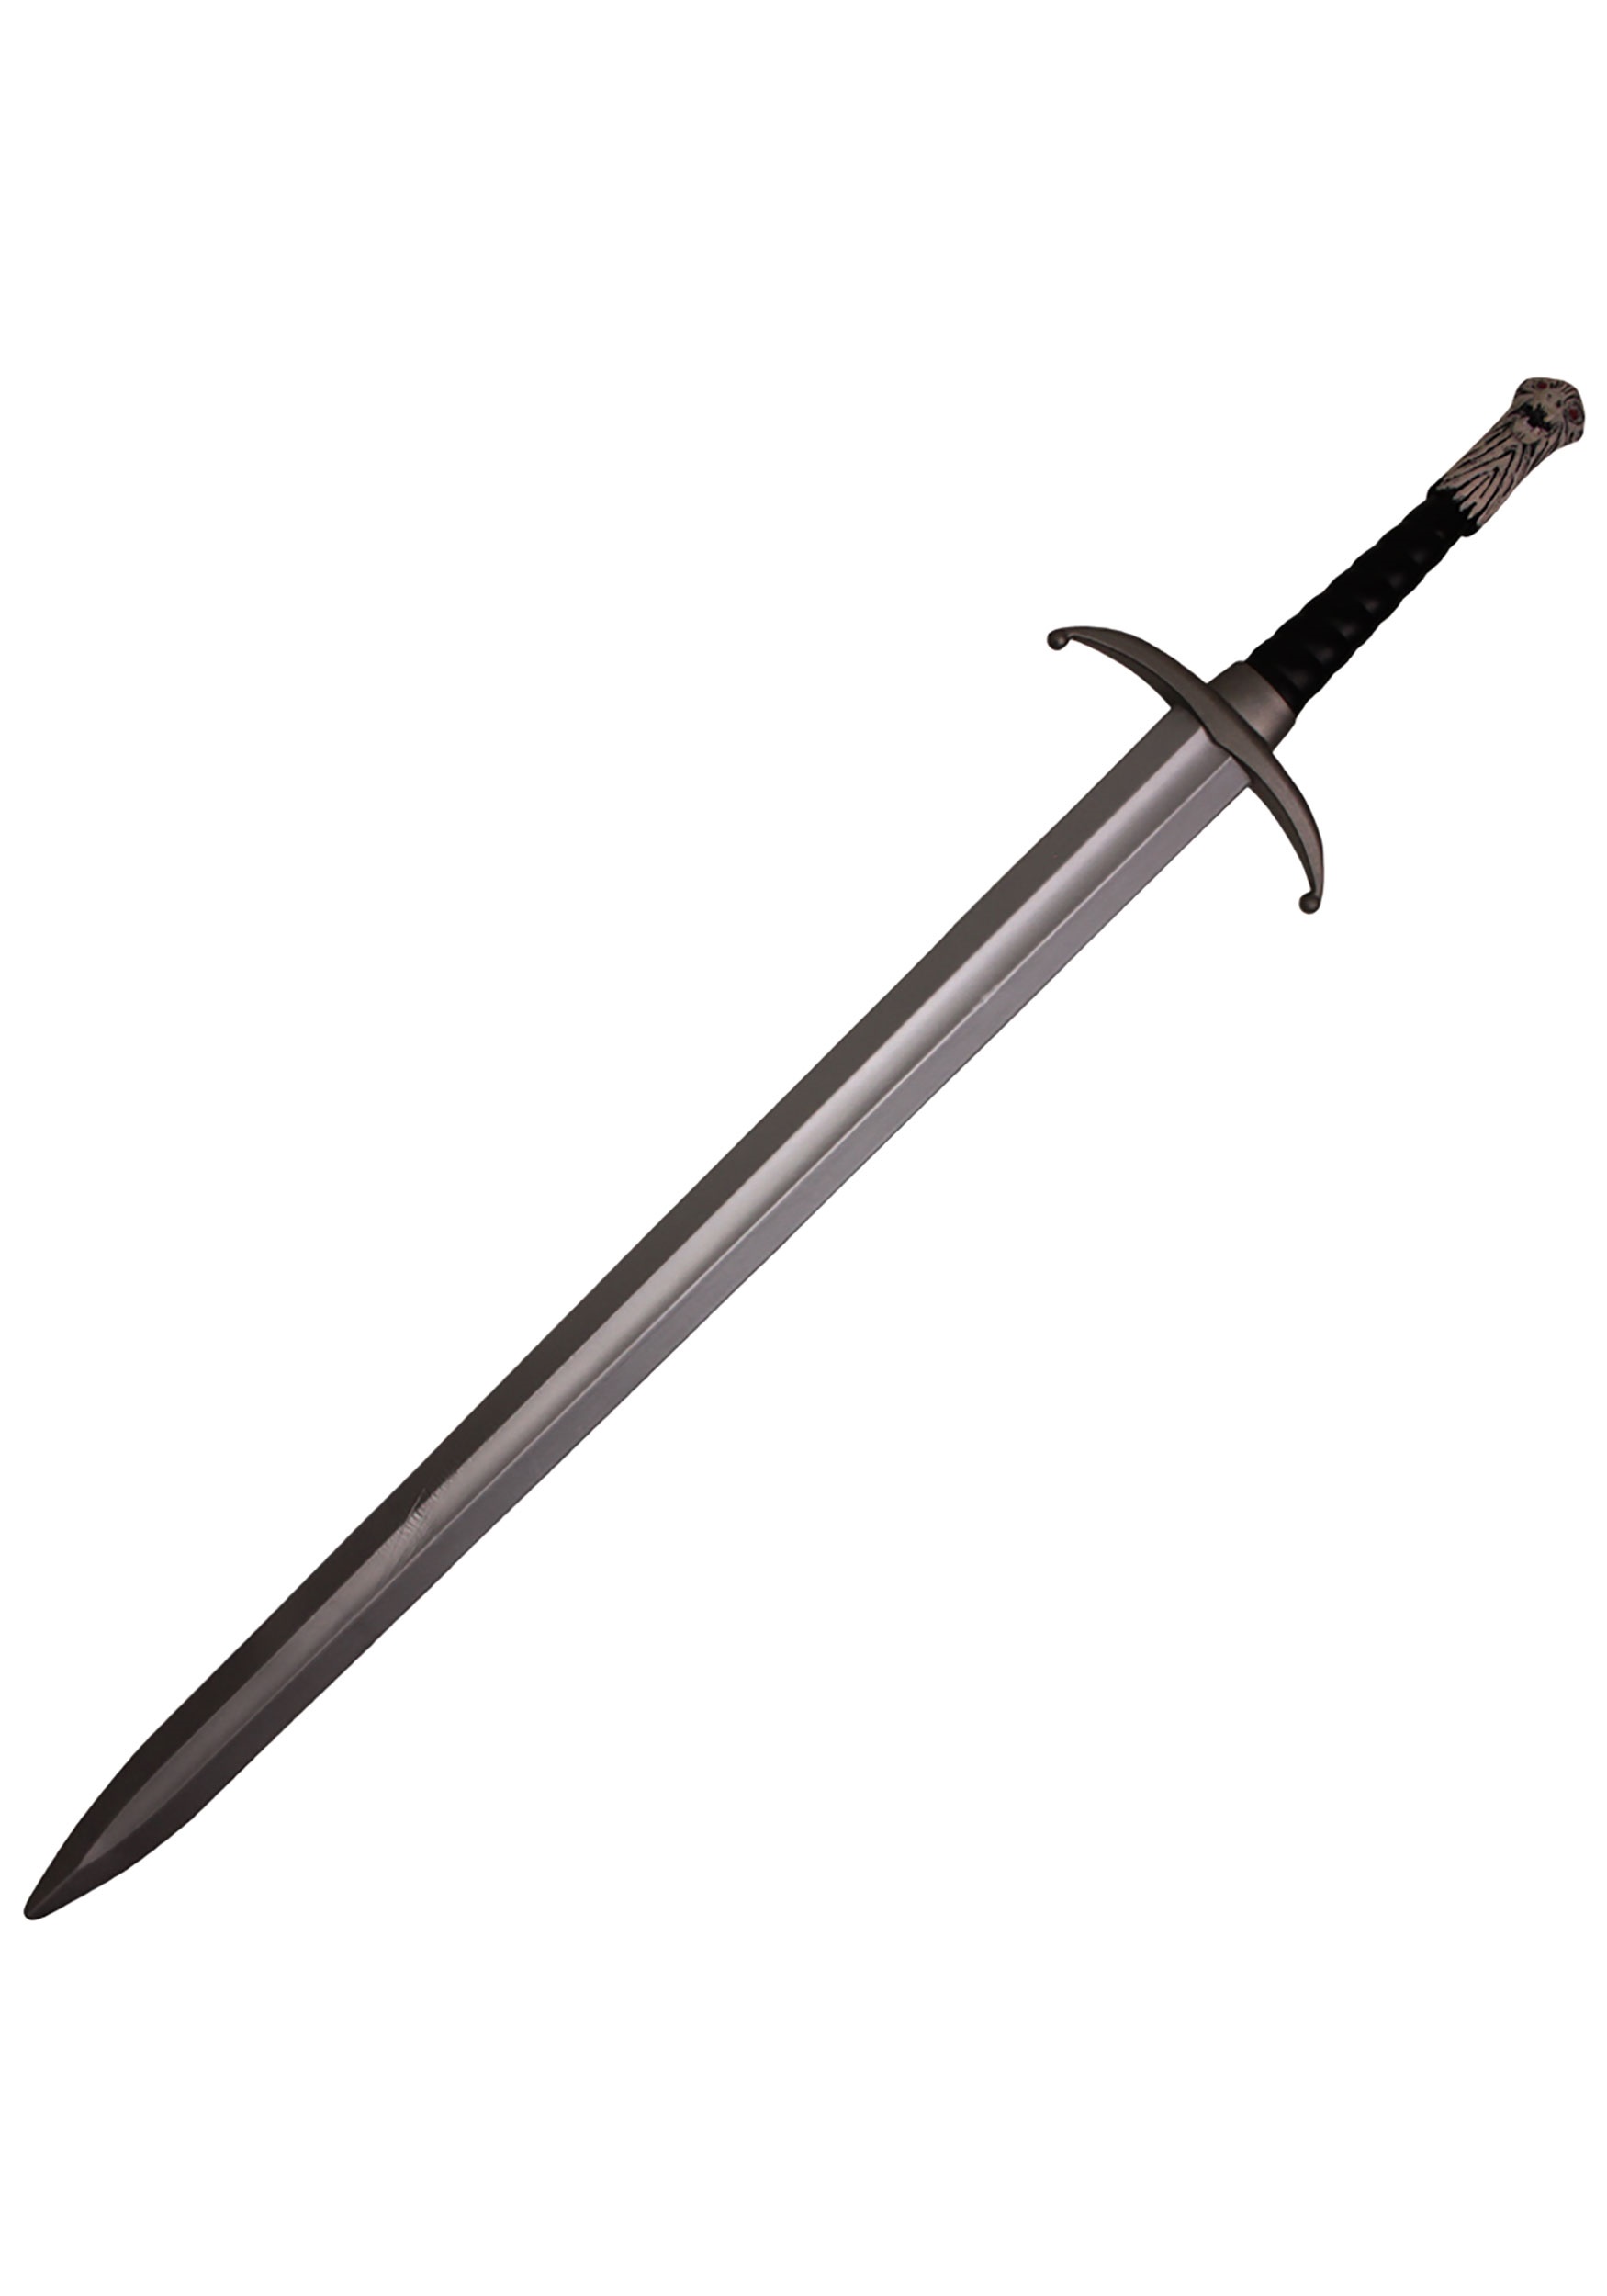 Game of Thrones Foam Longclaw Sword of Jon Snow Official HBO Licensed Product 